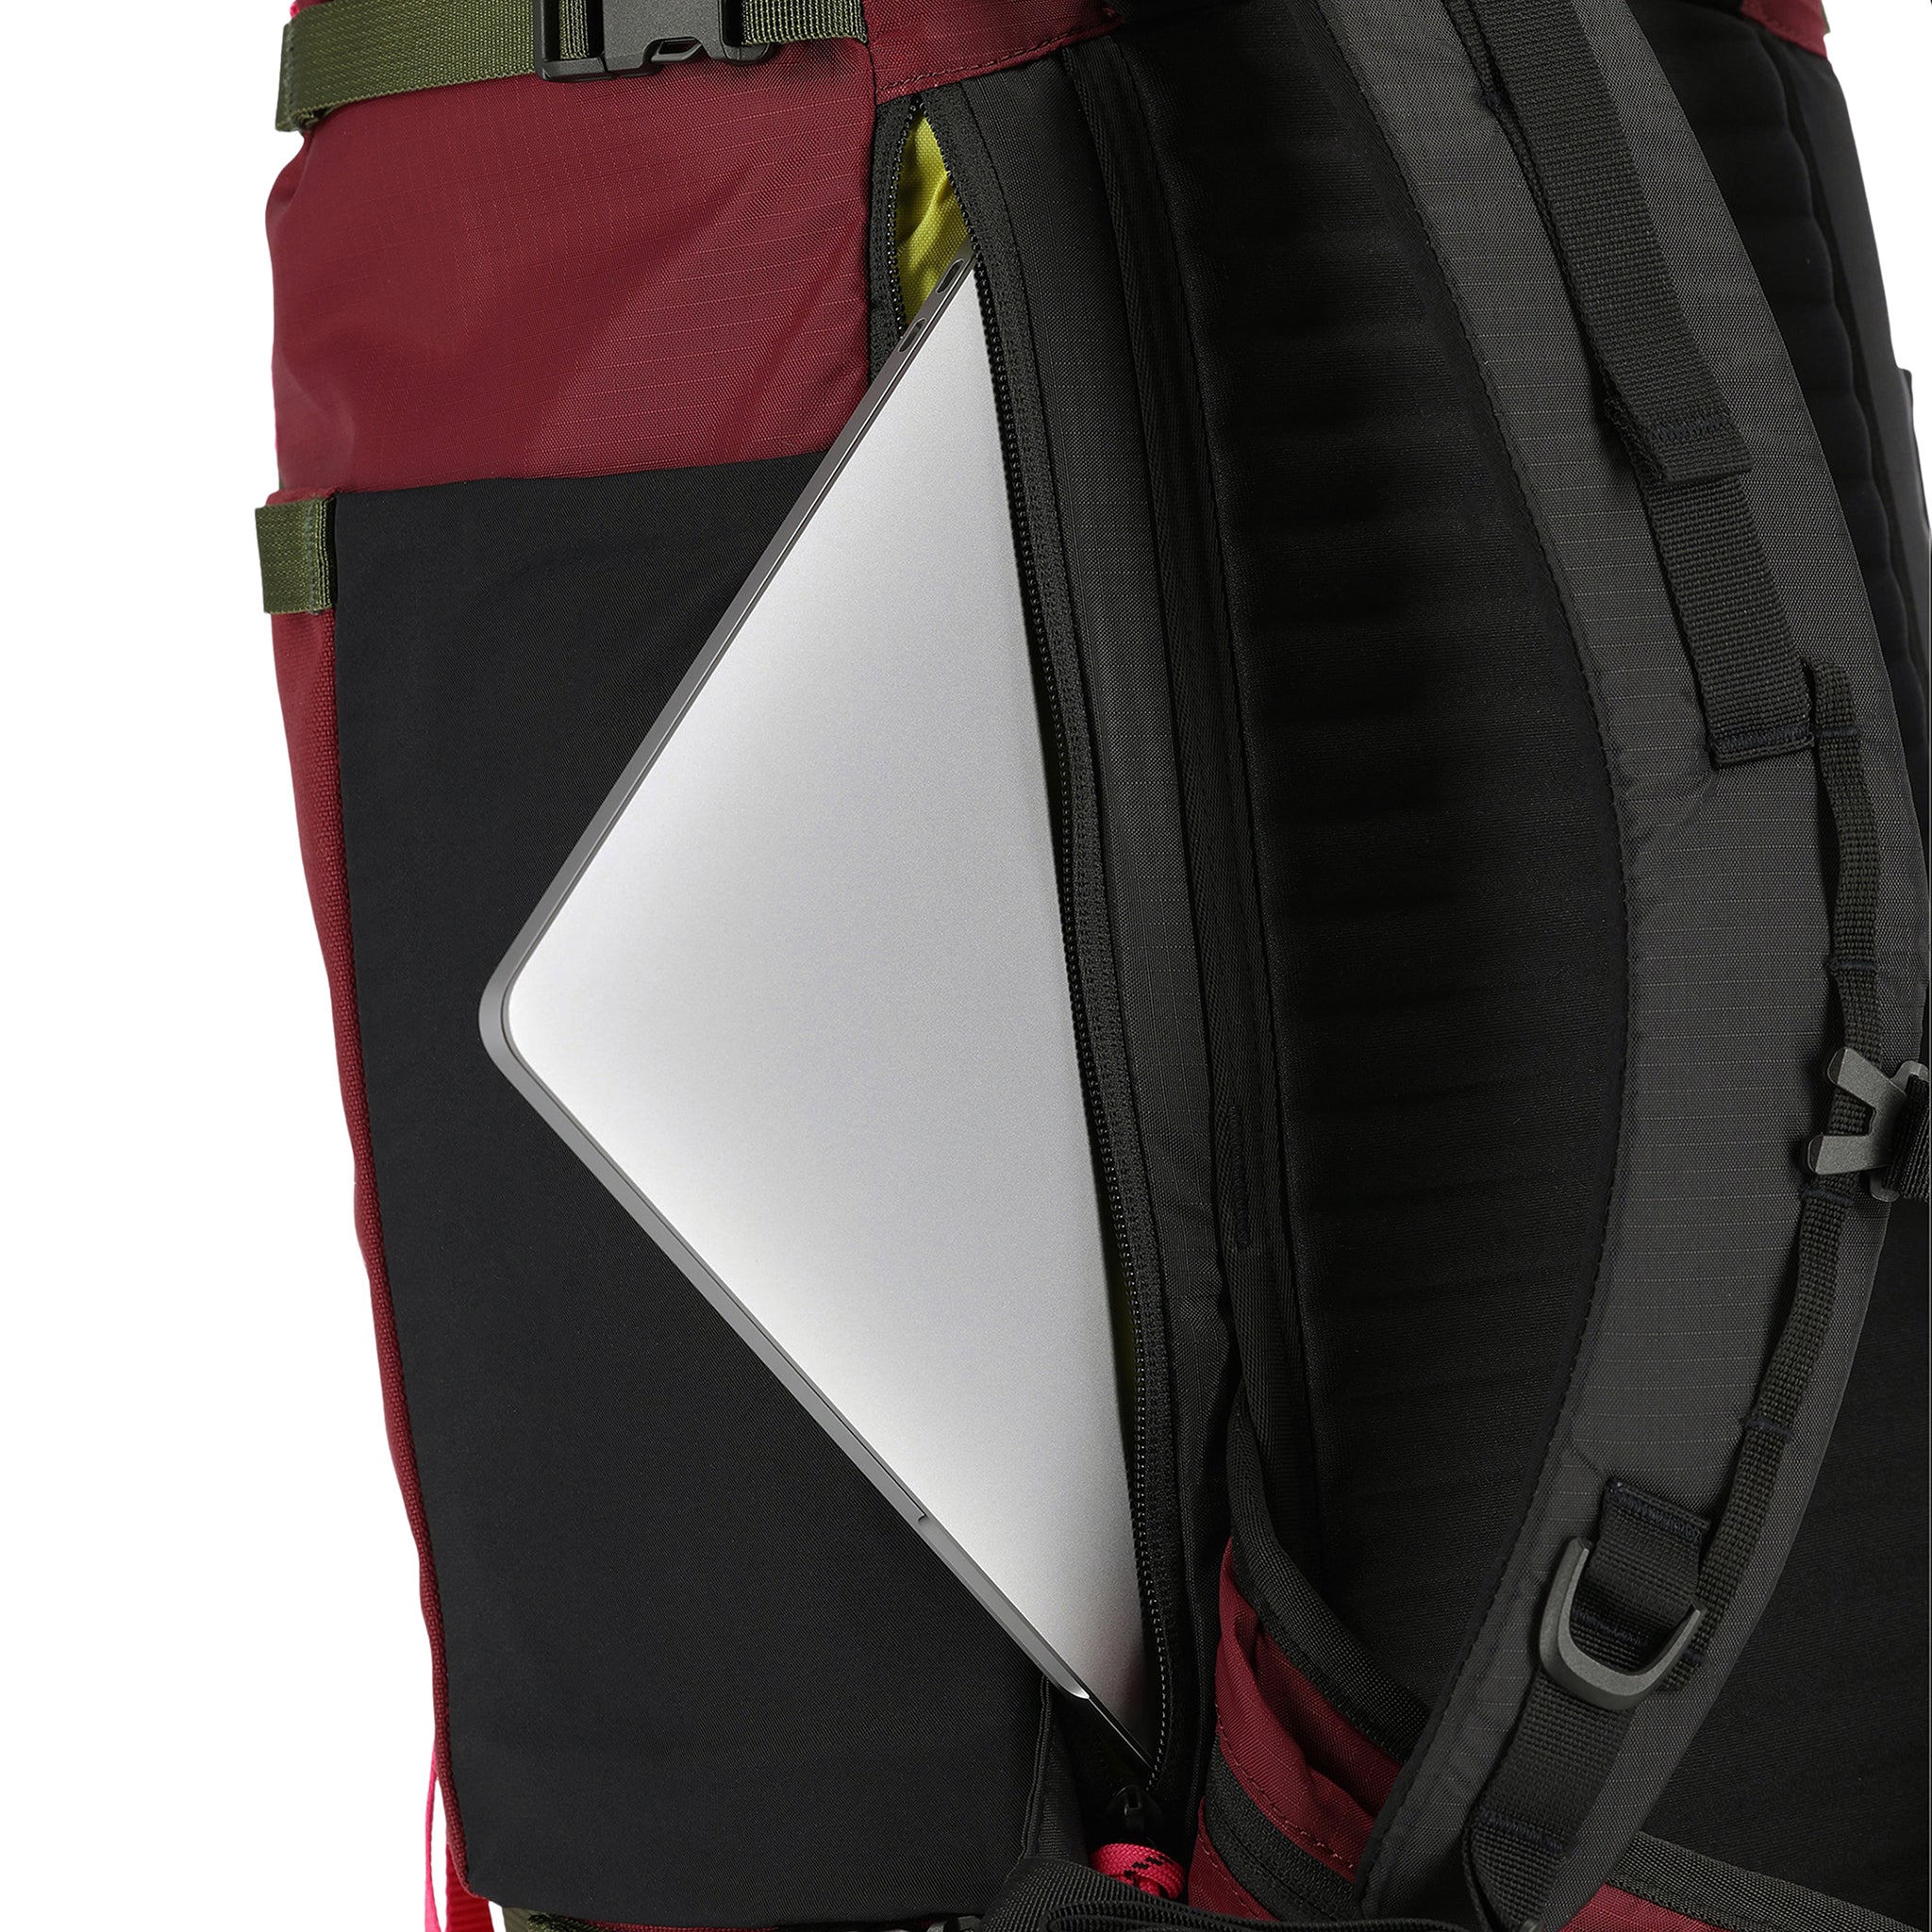 Shot of the laptop zip open compartment for the Topo Designs Mountain Pack 28L hiking backpack with external laptop sleeve access in lightweight recycled "Burgundy / Dark Khaki" nylon.